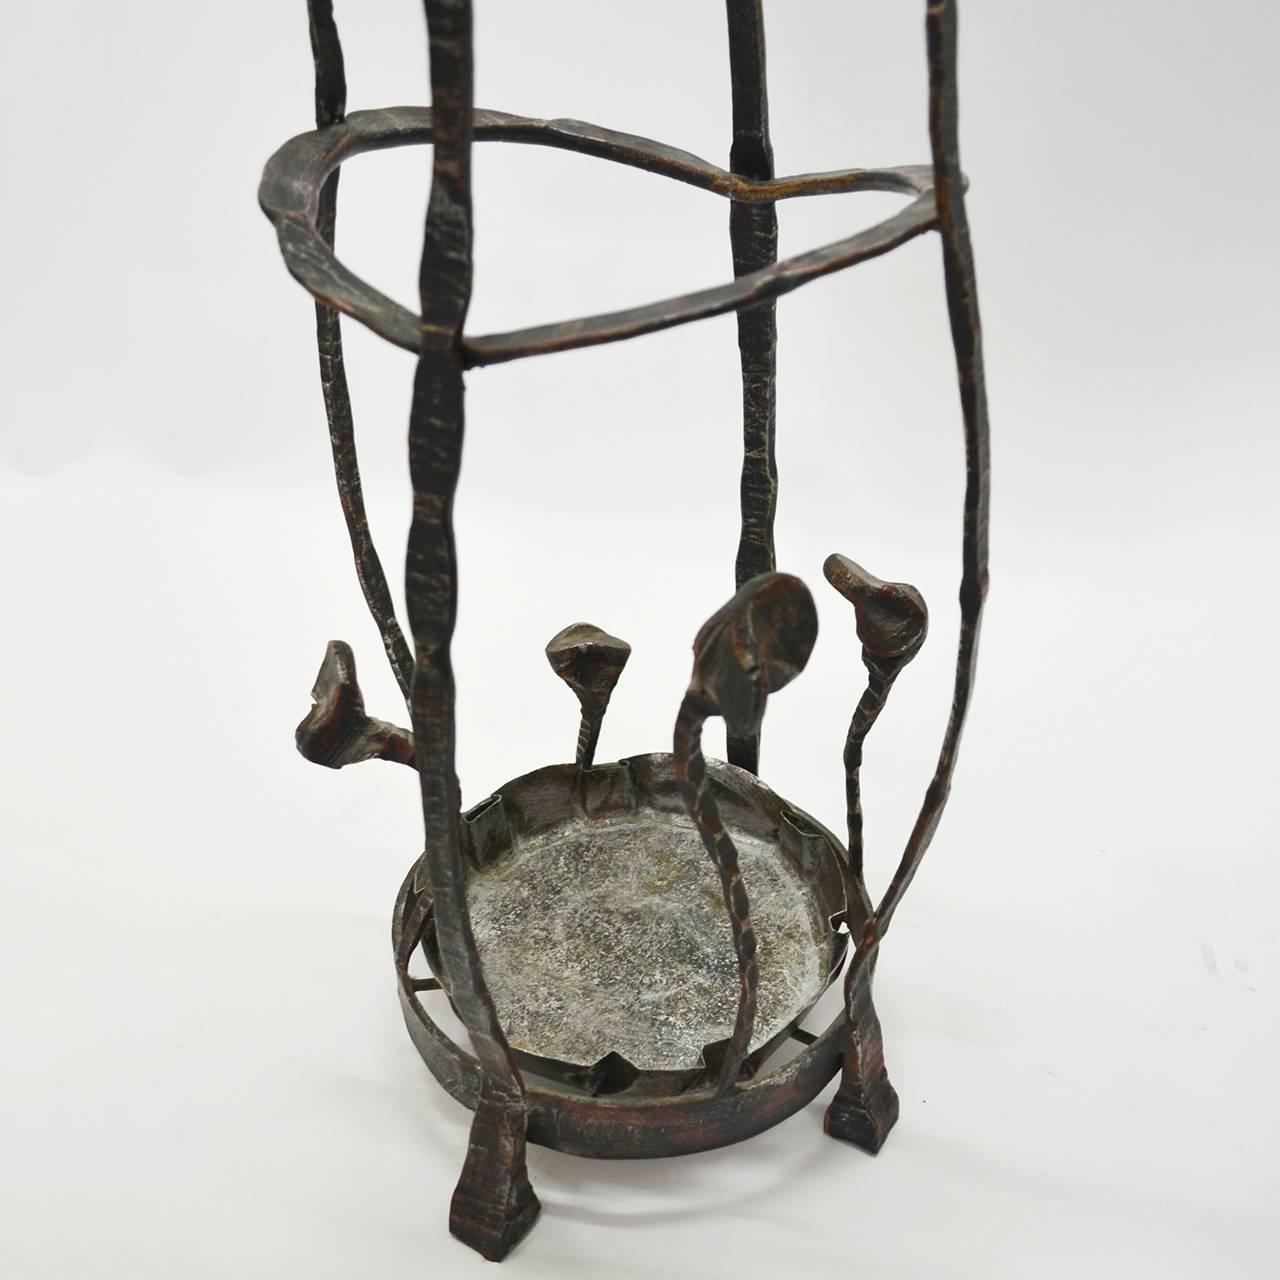 Metal sculptural umbrella stand from Italy in the 1960s signed by Marsura.
It is part of complete entrance hall set. Chairs, coats hooks, mirrors and wall lights are available.